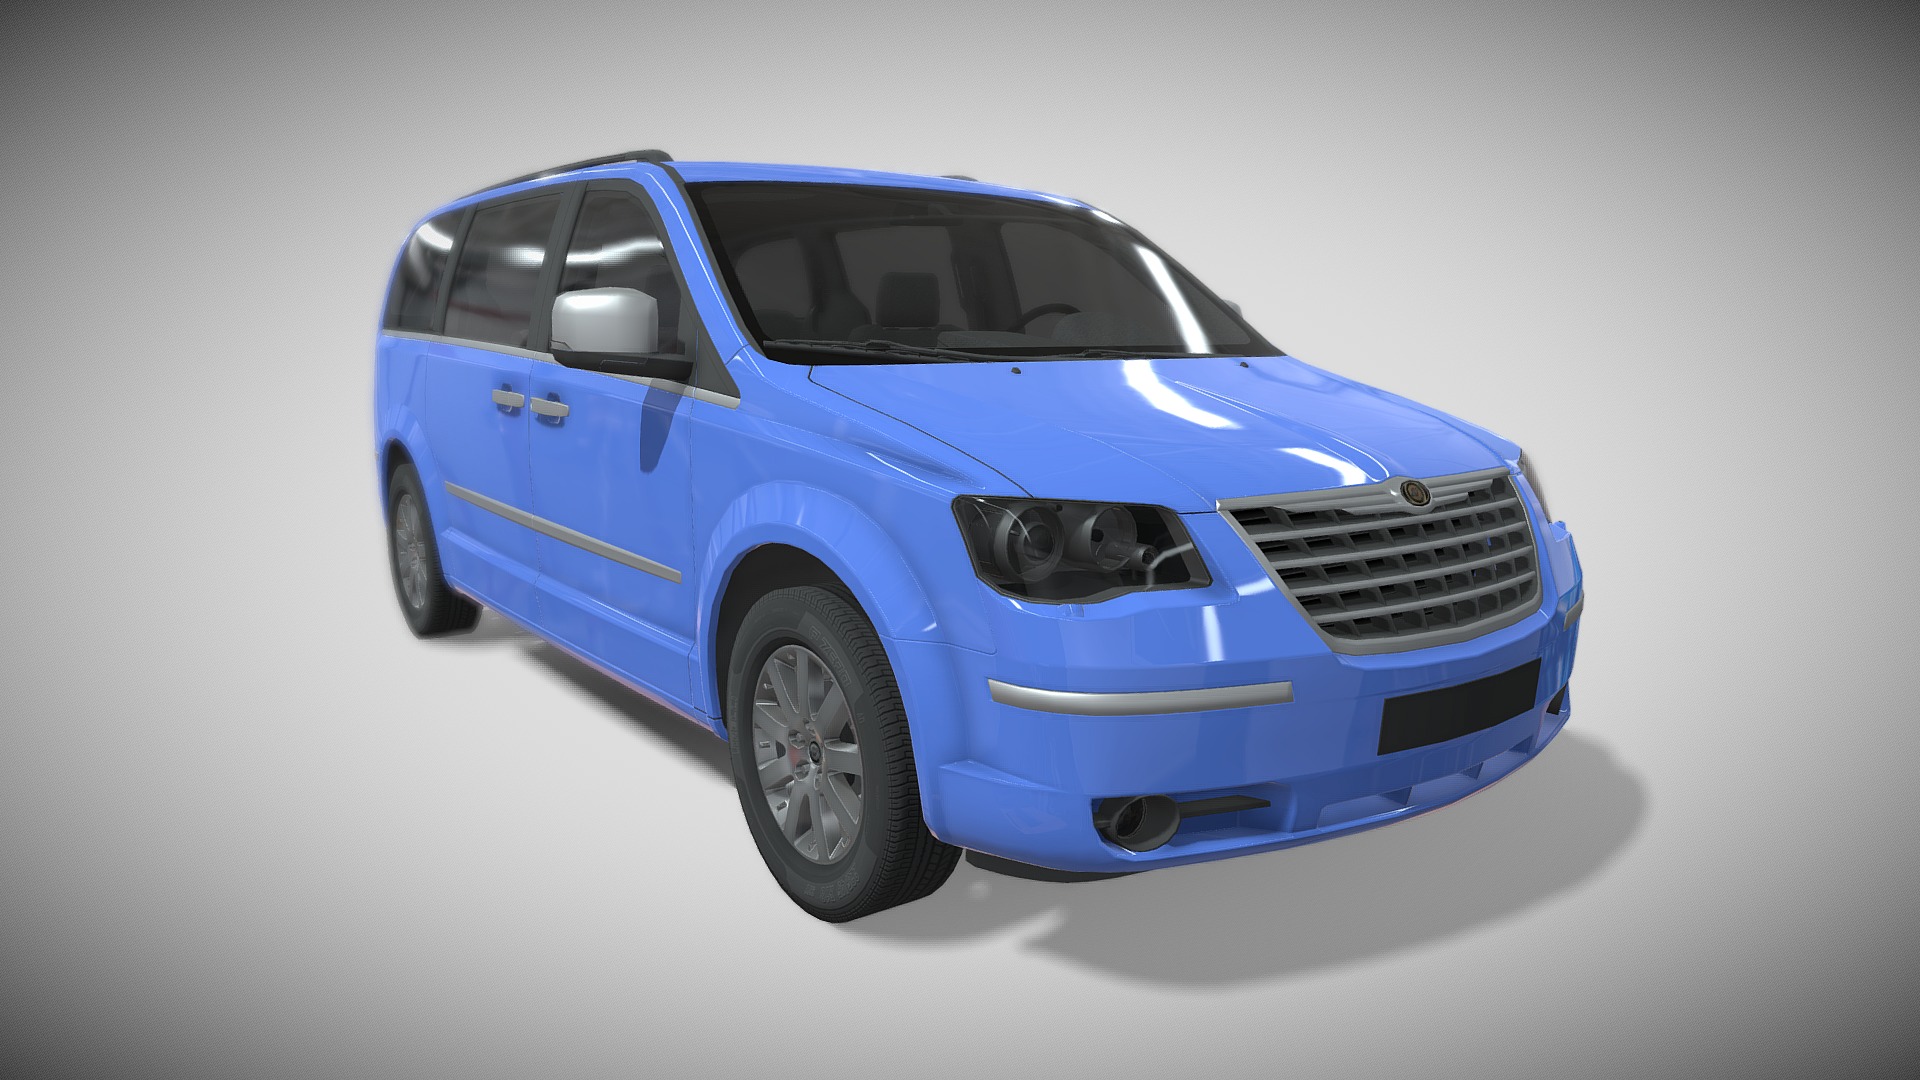 3D model Chrysler FamilyCar Model - This is a 3D model of the Chrysler FamilyCar Model. The 3D model is about a blue car with a white background.